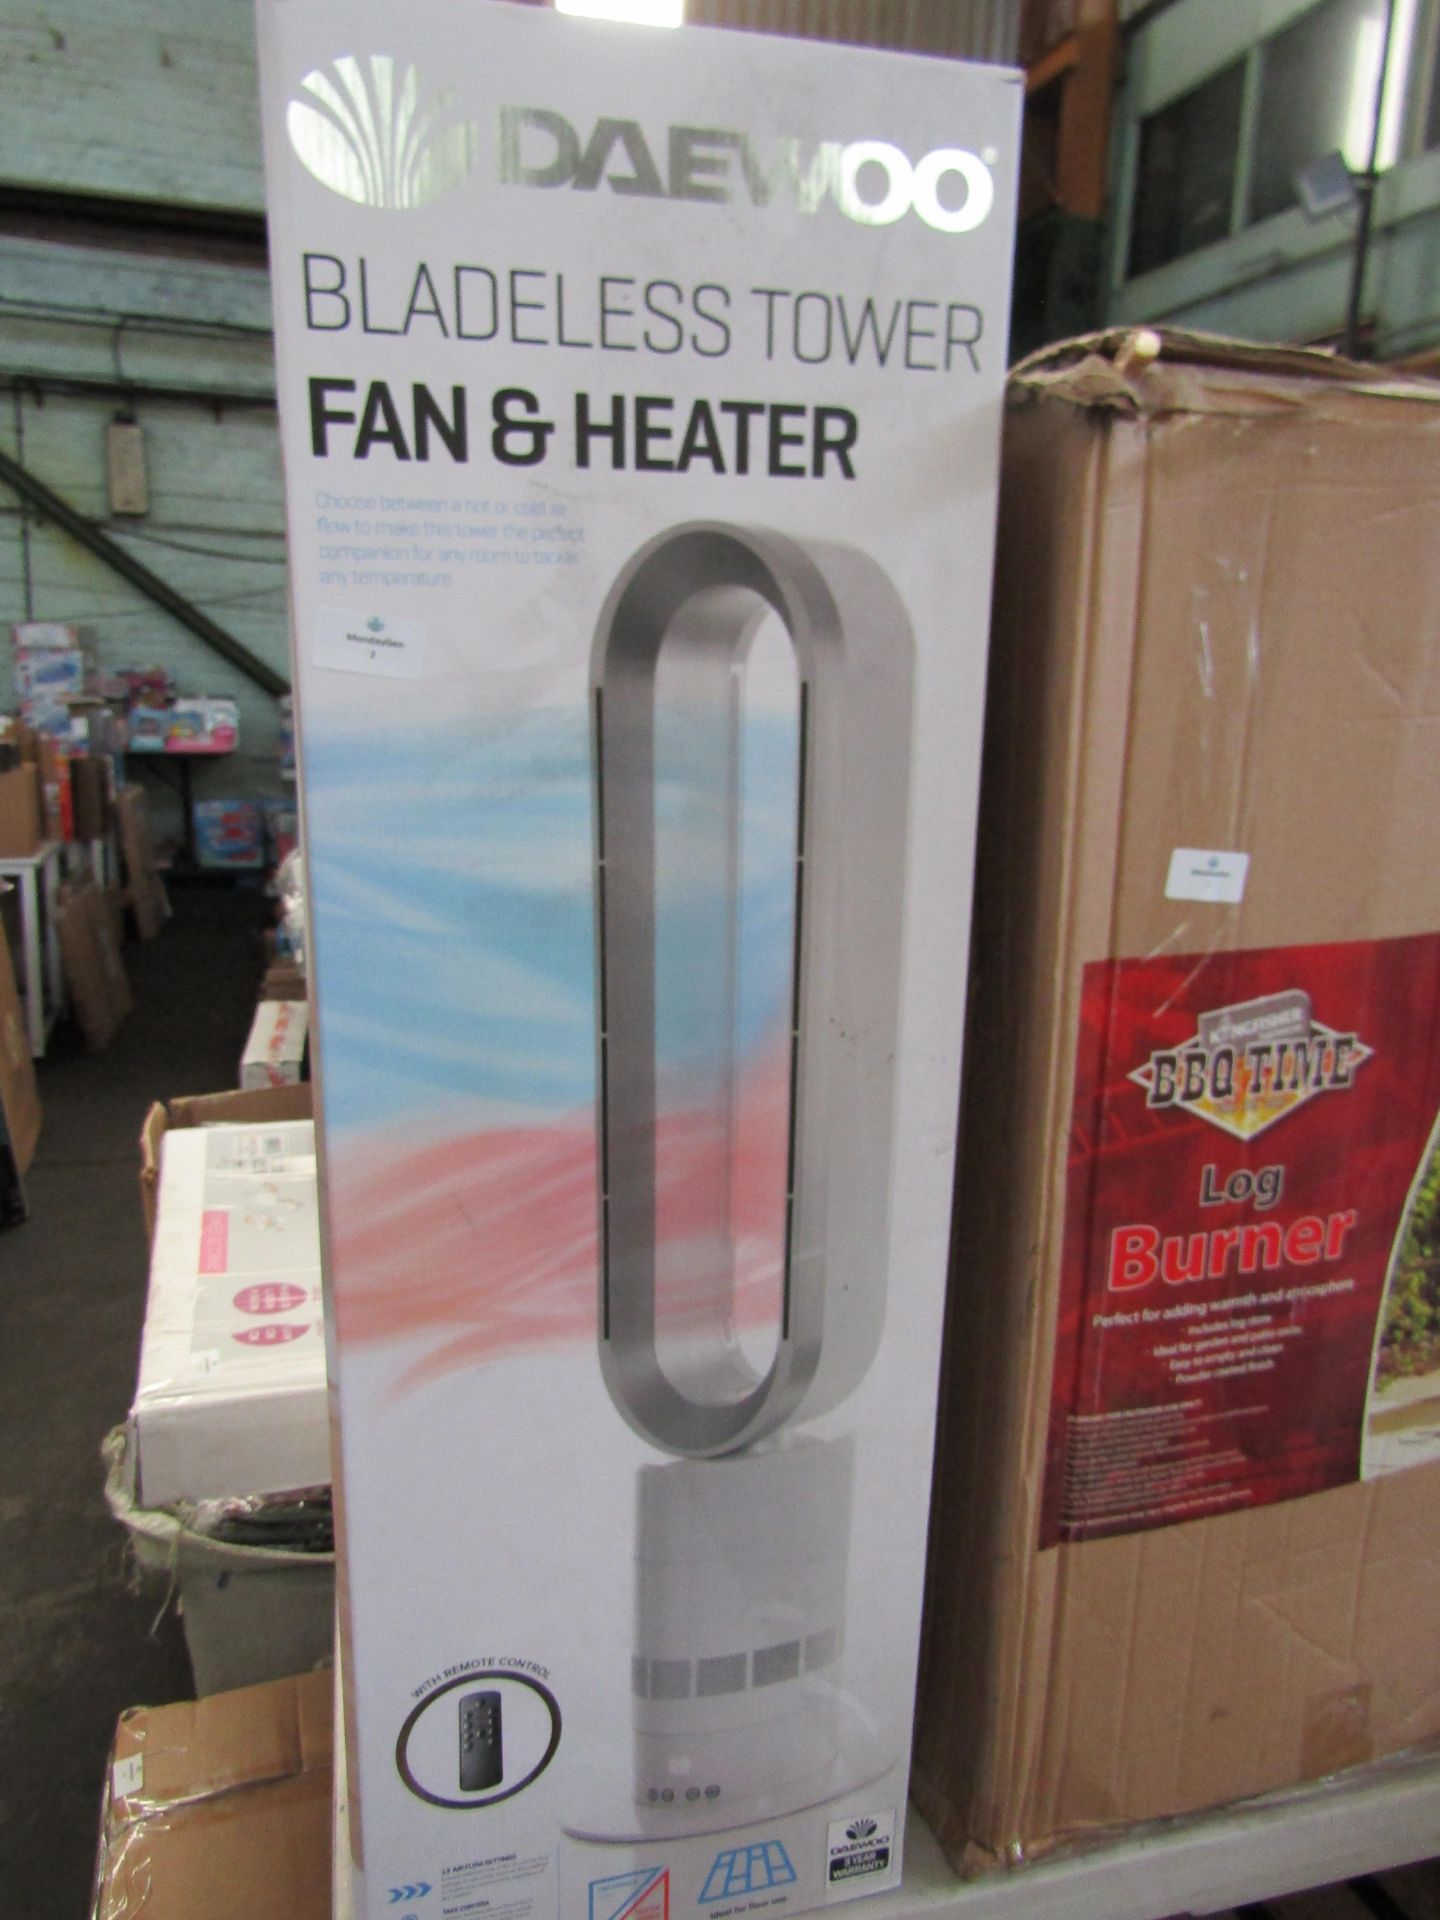 Daewoo - Bladeless Tower Fan & Heater - Untested & Boxed.